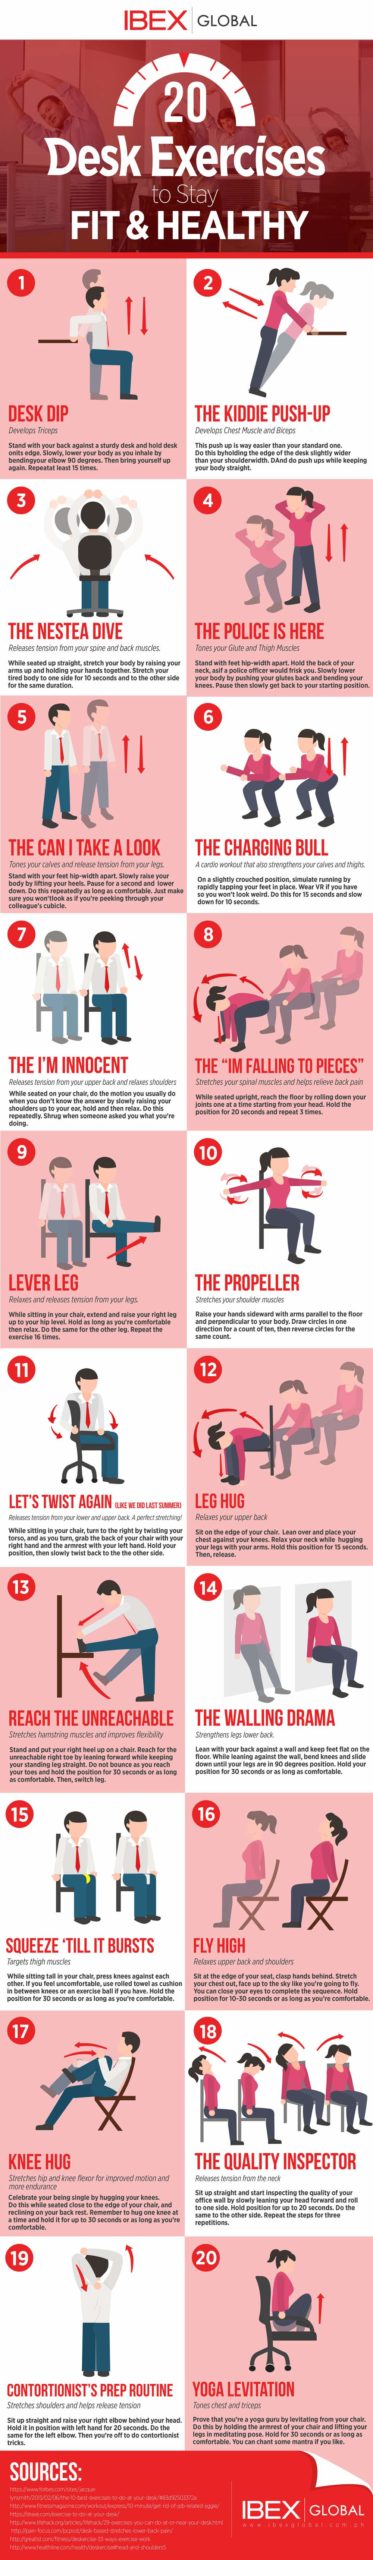 Desk-Exercises-to-Stay-Fit-Healthy